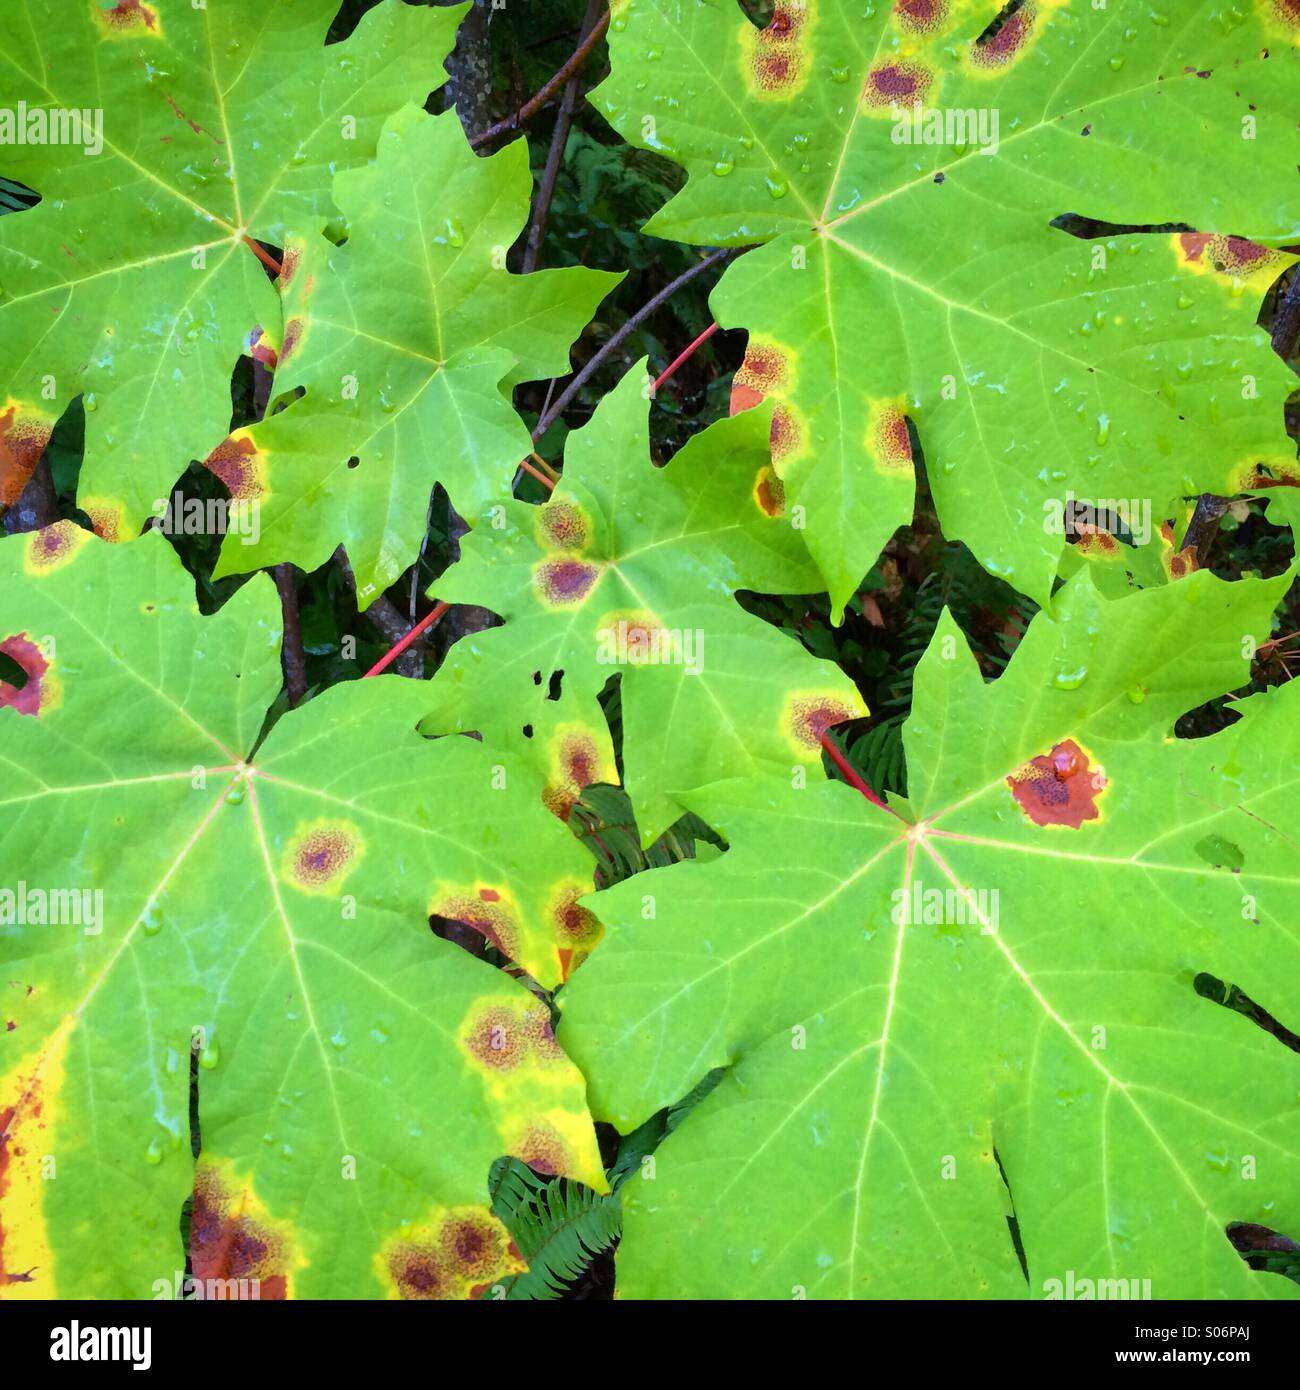 Autumn, fall color on leaves of Bigleaf Maple tree, Vancouver Island, BC, Canada Stock Photo